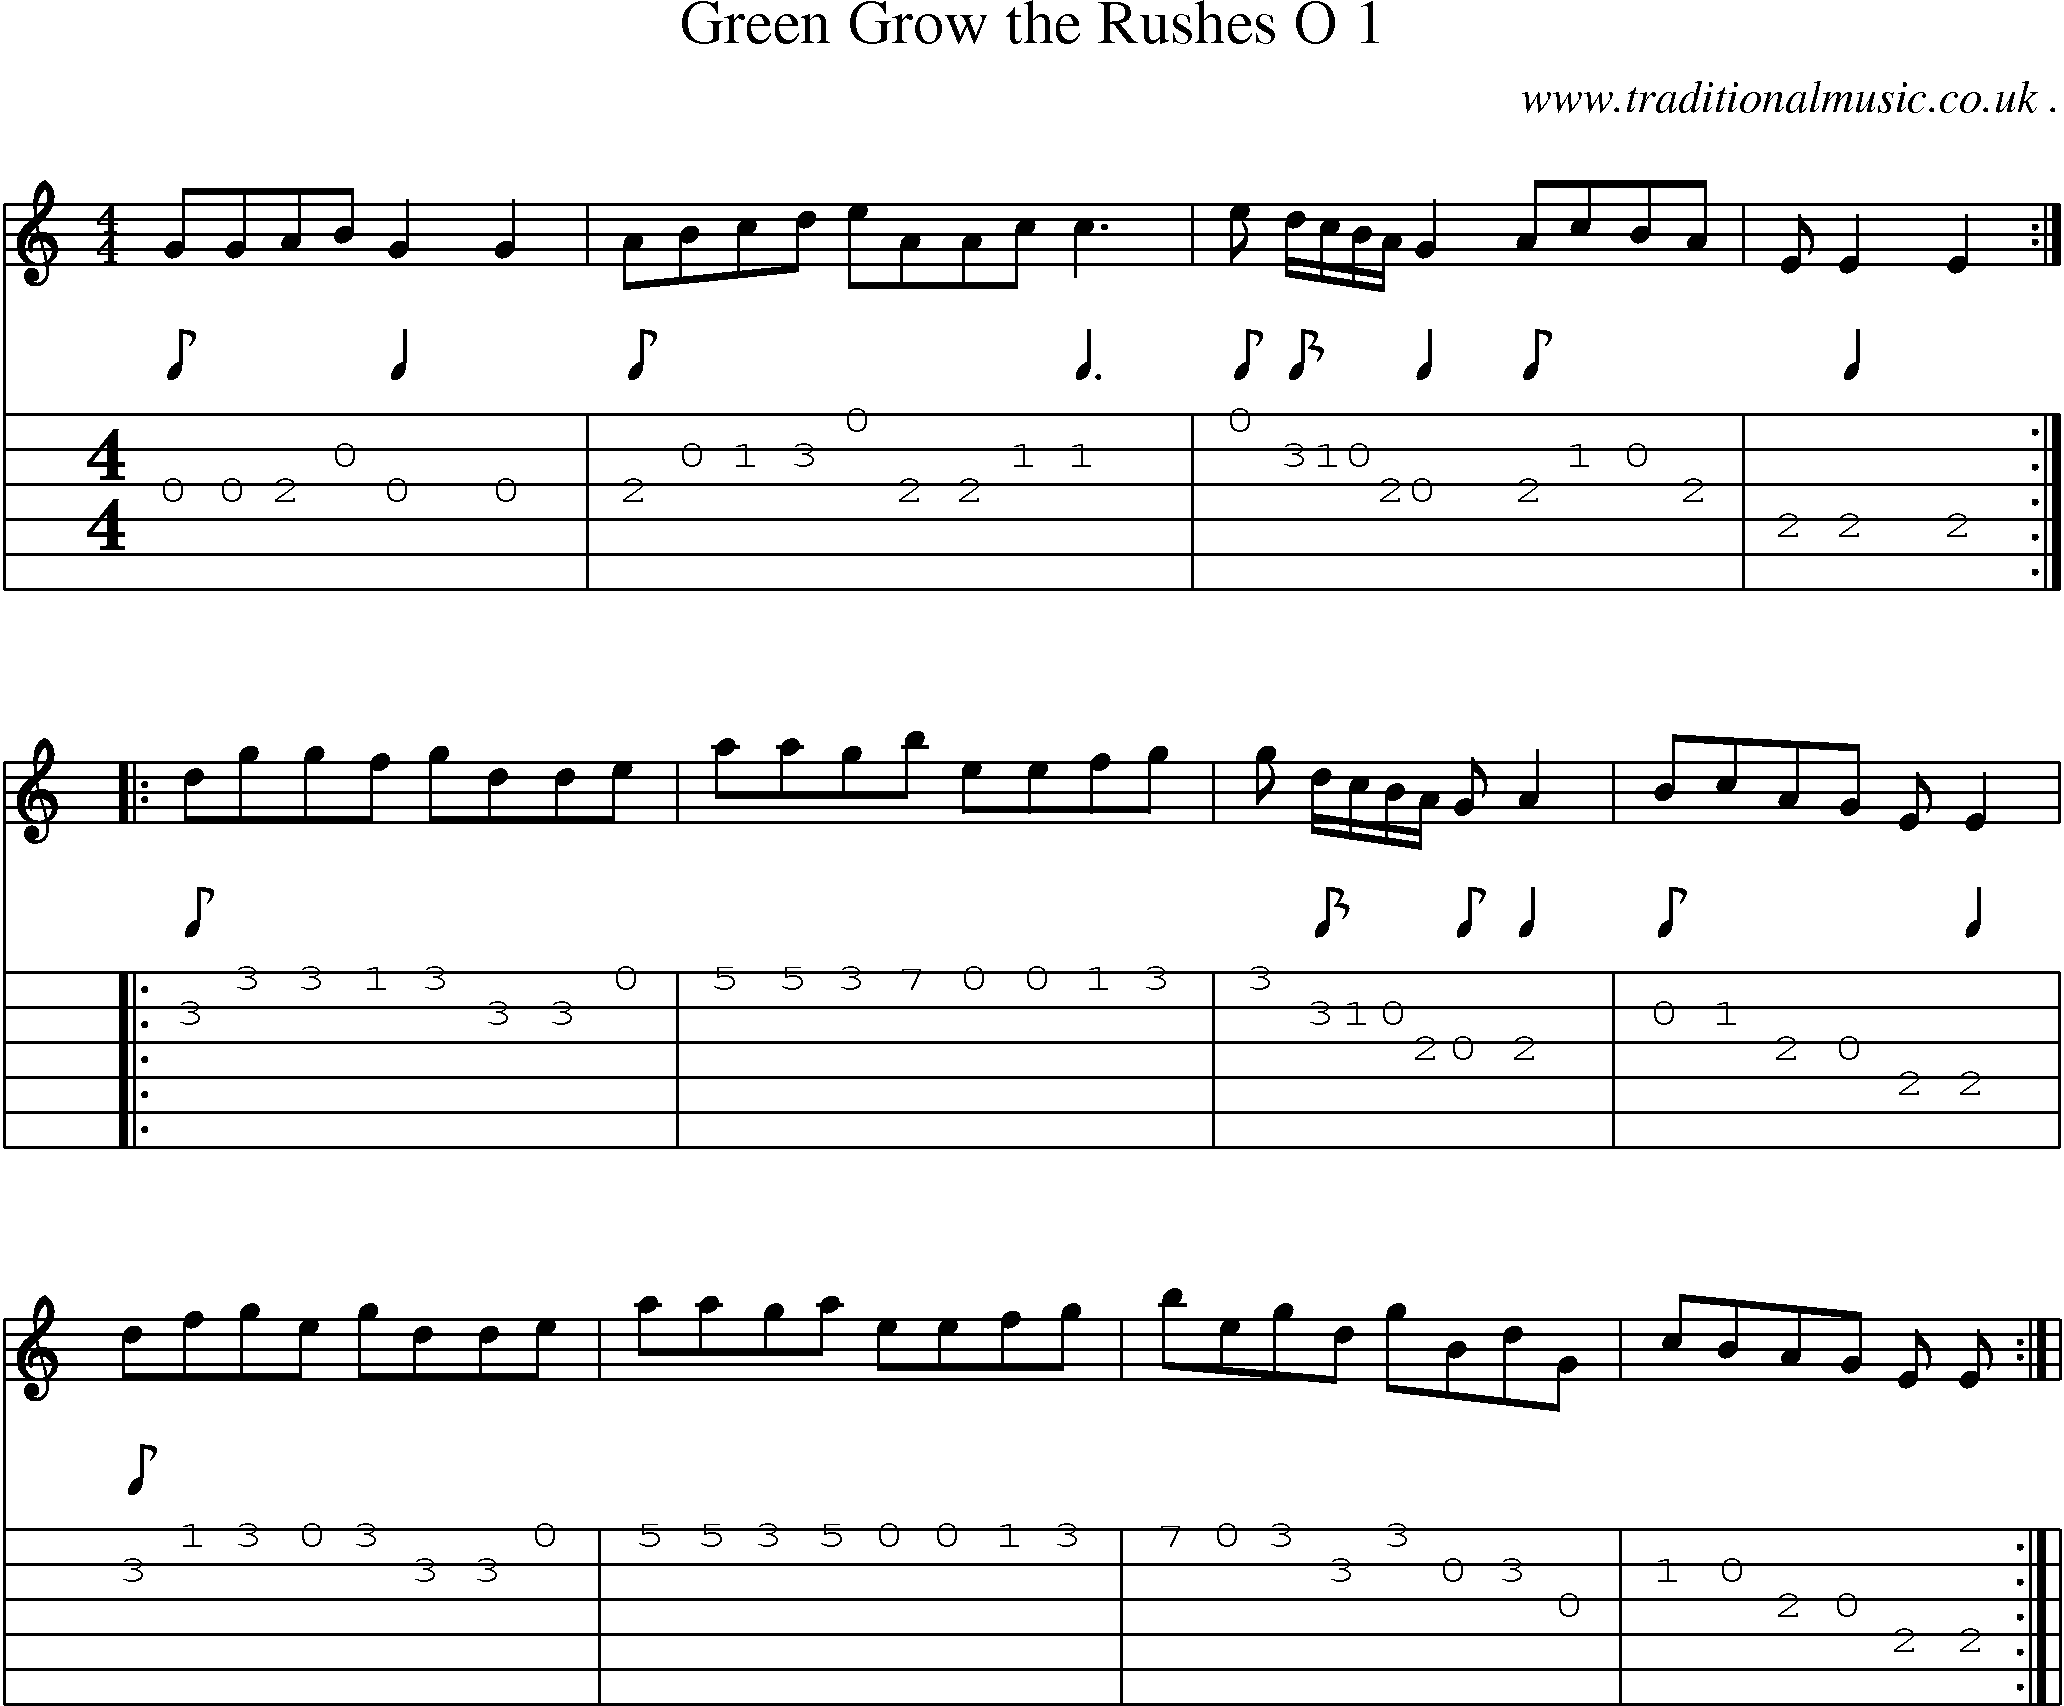 Sheet-Music and Guitar Tabs for Green Grow The Rushes O 1